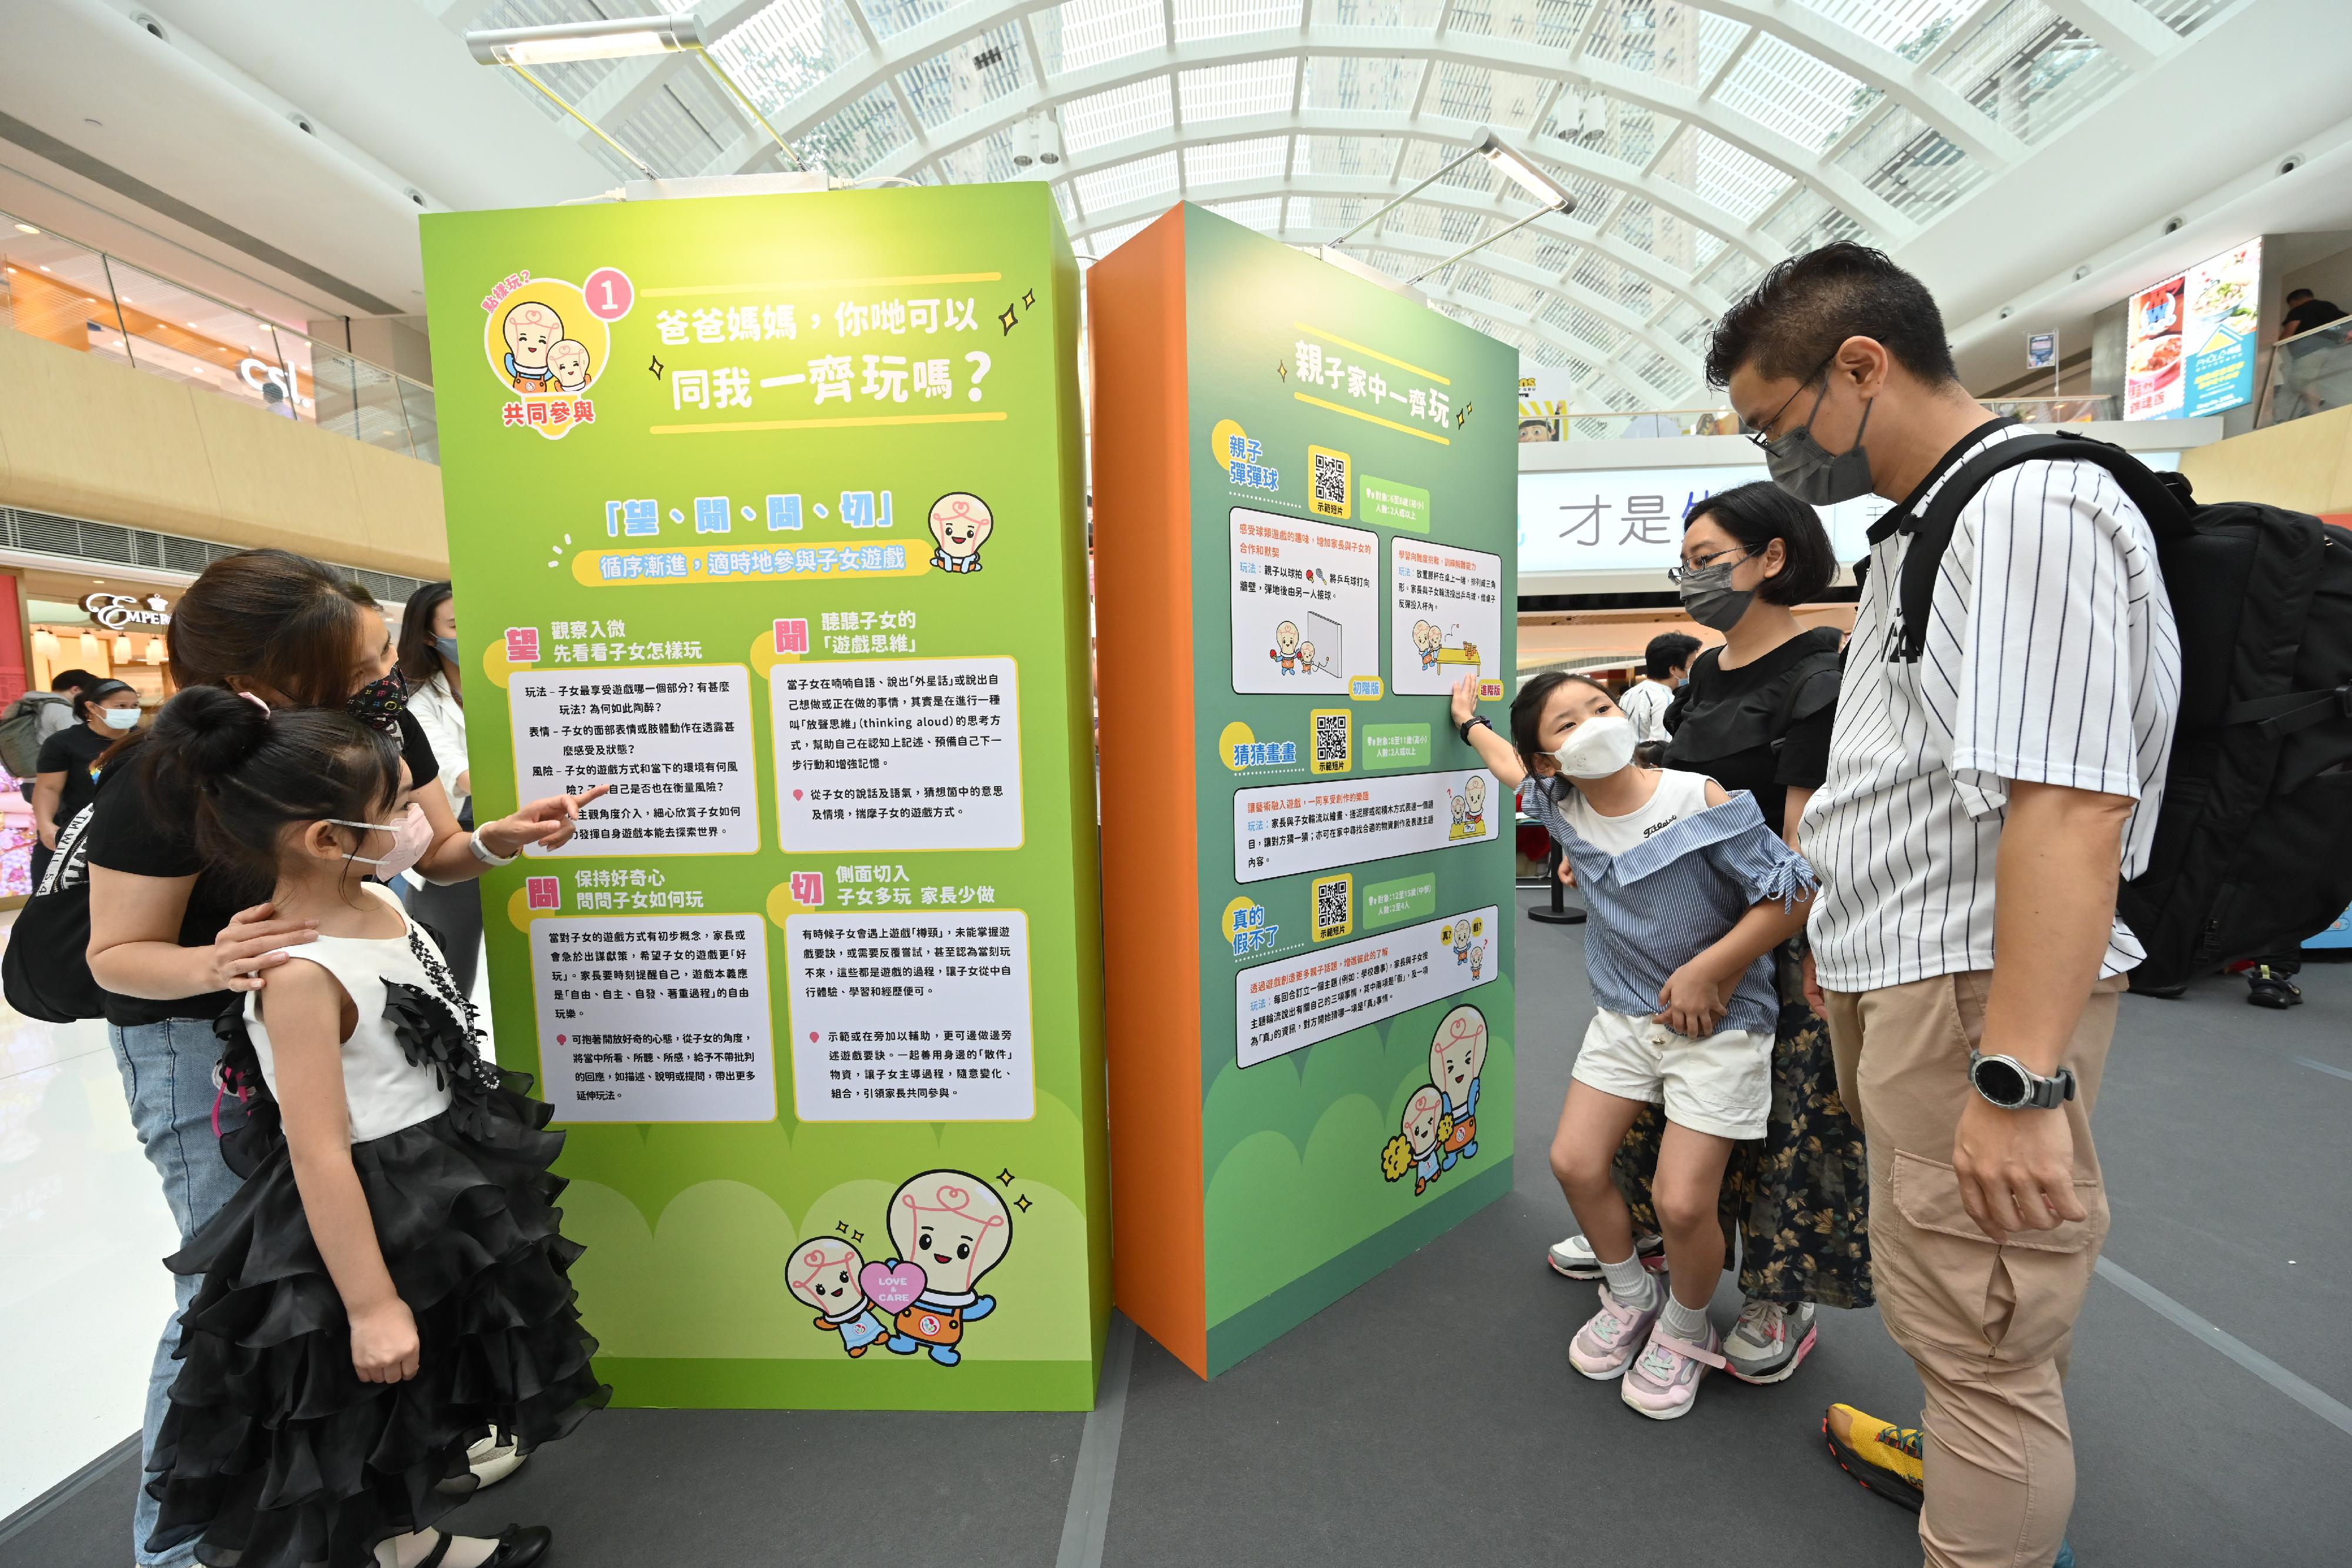 To promote the Positive Parent Campaign, the Education Bureau held the "Playtime with Children" Roving Exhibition at MOSTown in Ma On Shan today (June 18).